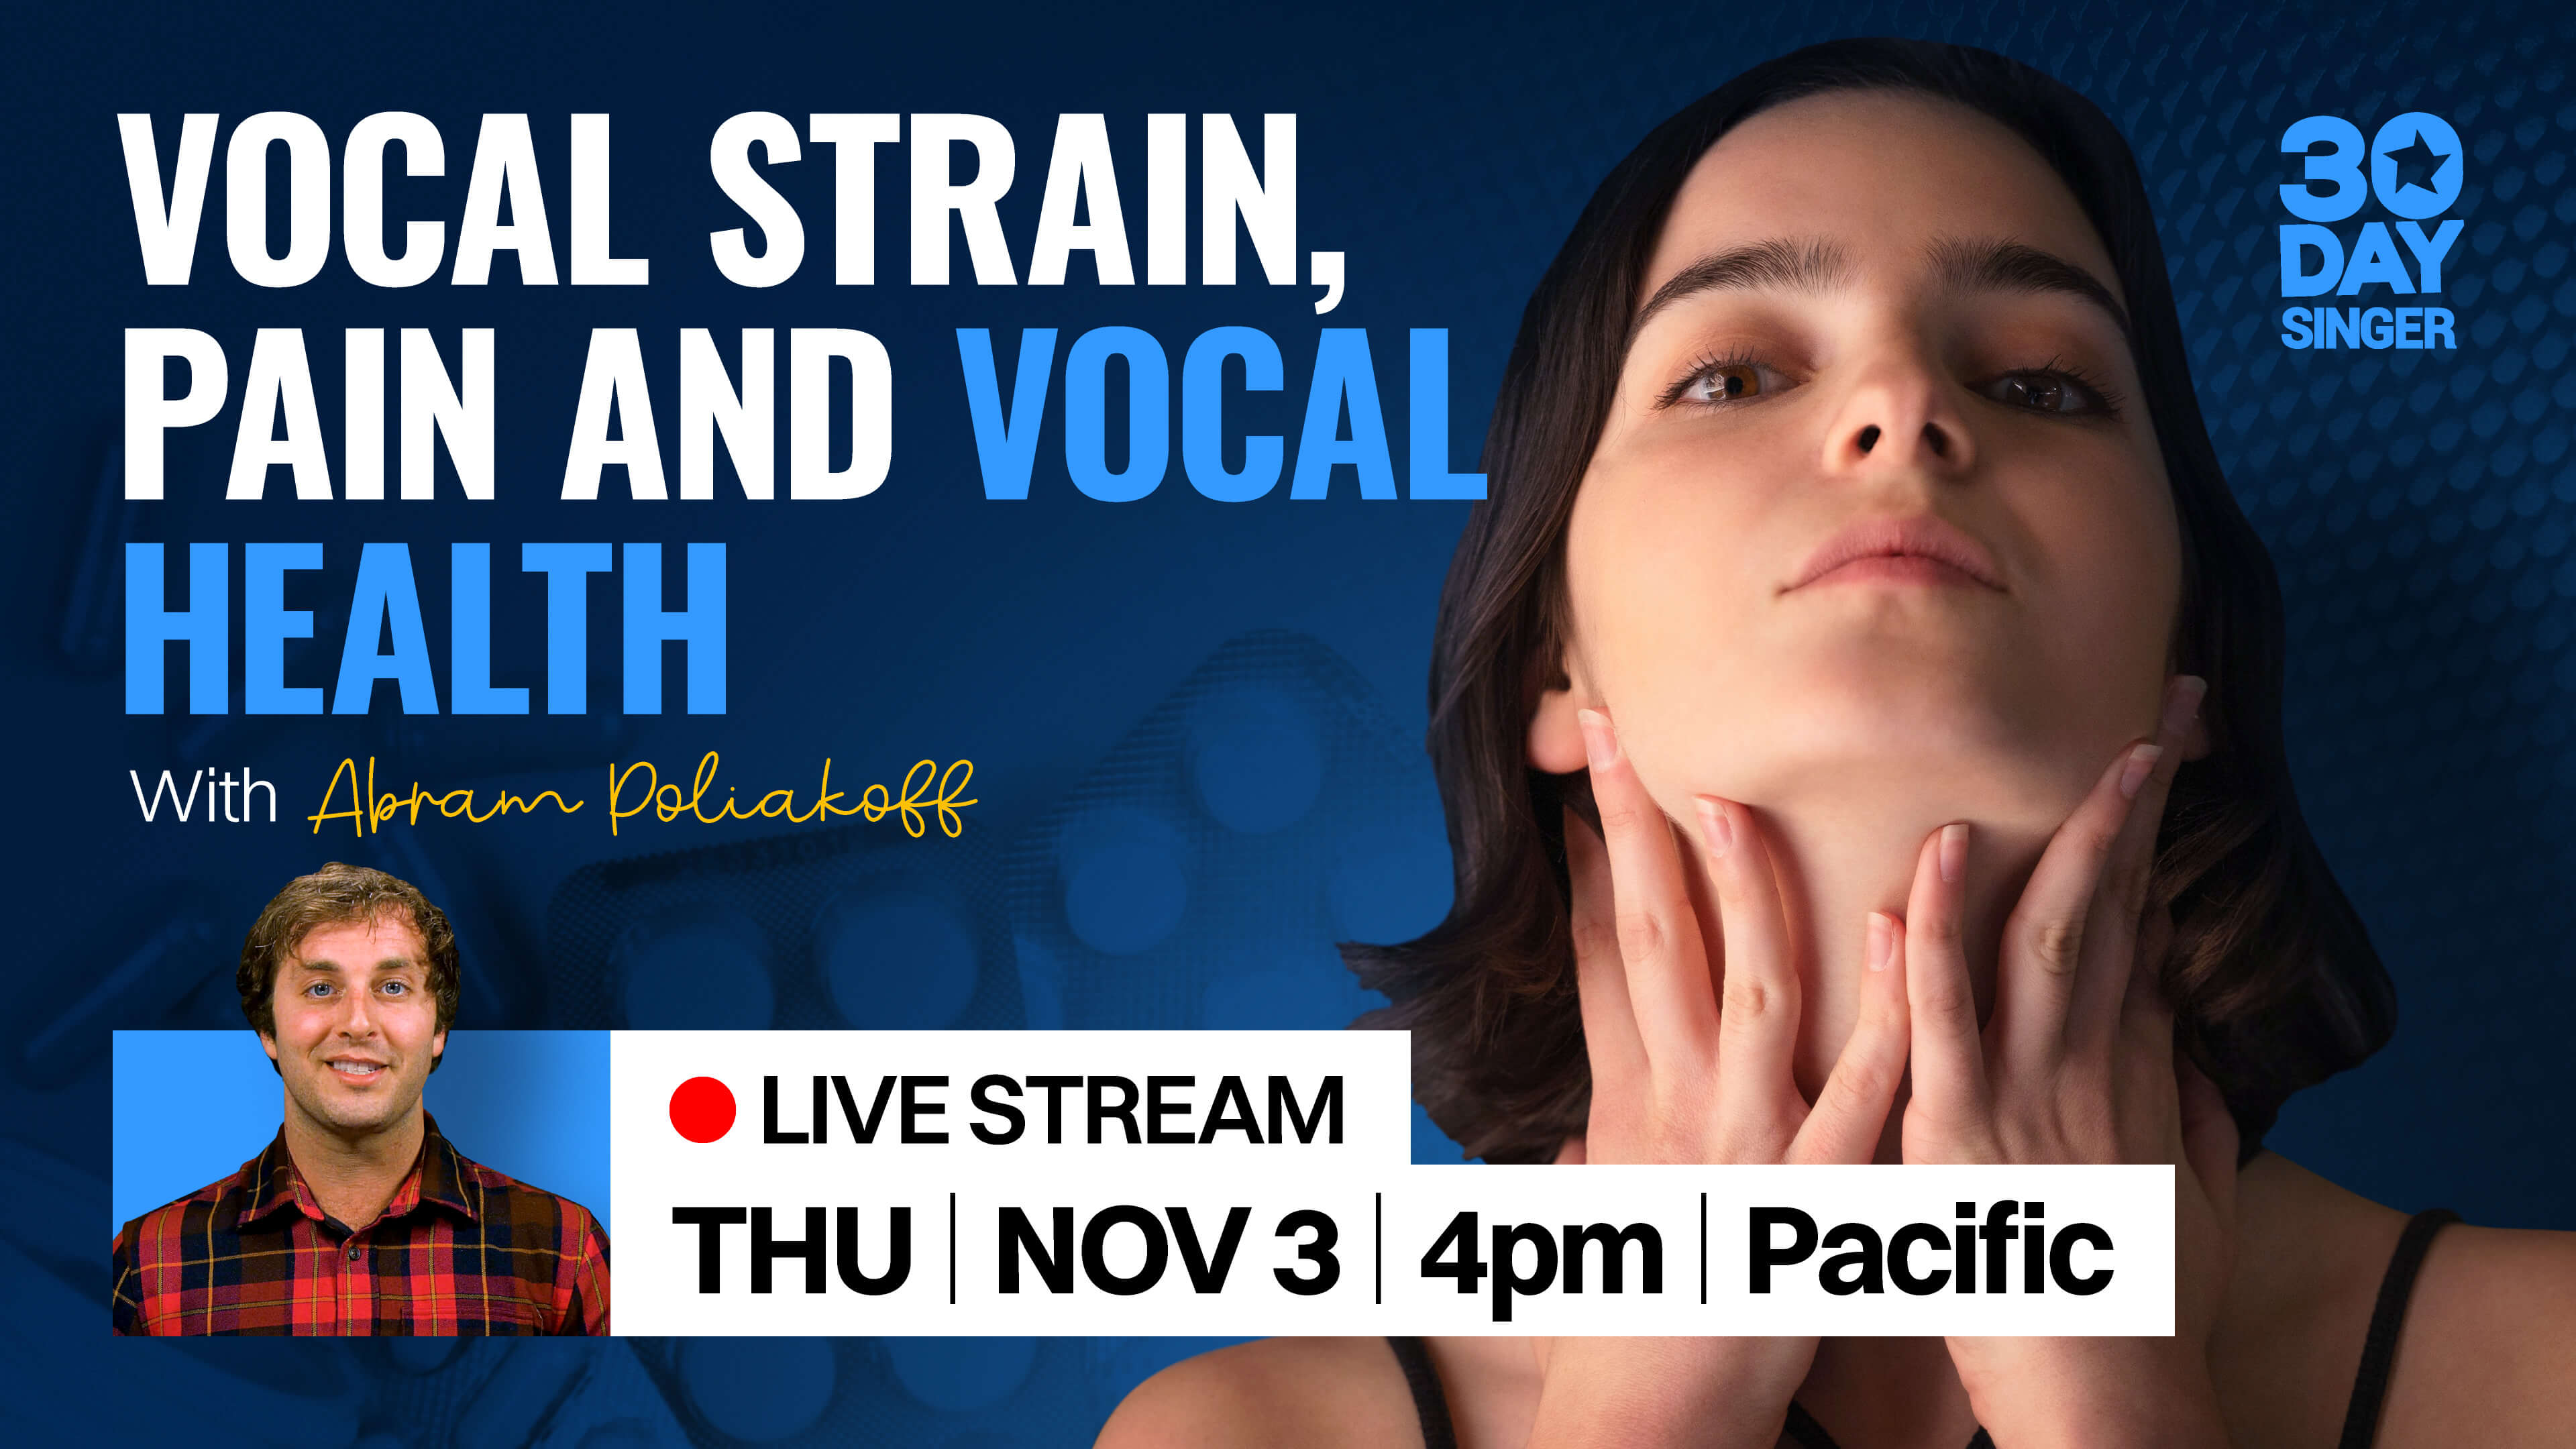 Vocal Strain, Pain and Health